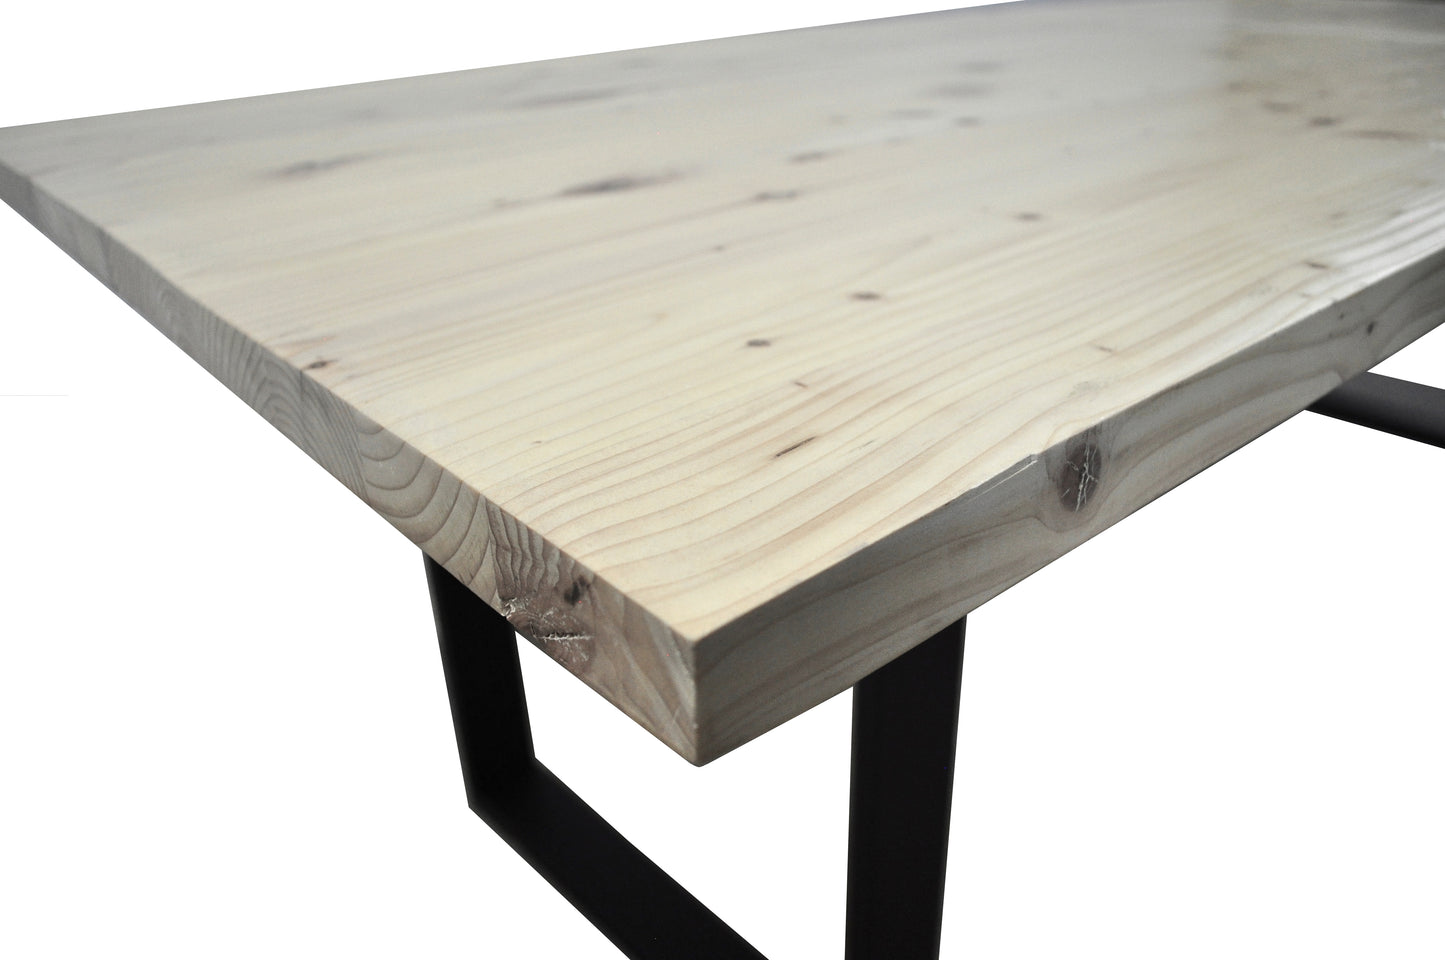 Pulvis Conference Table